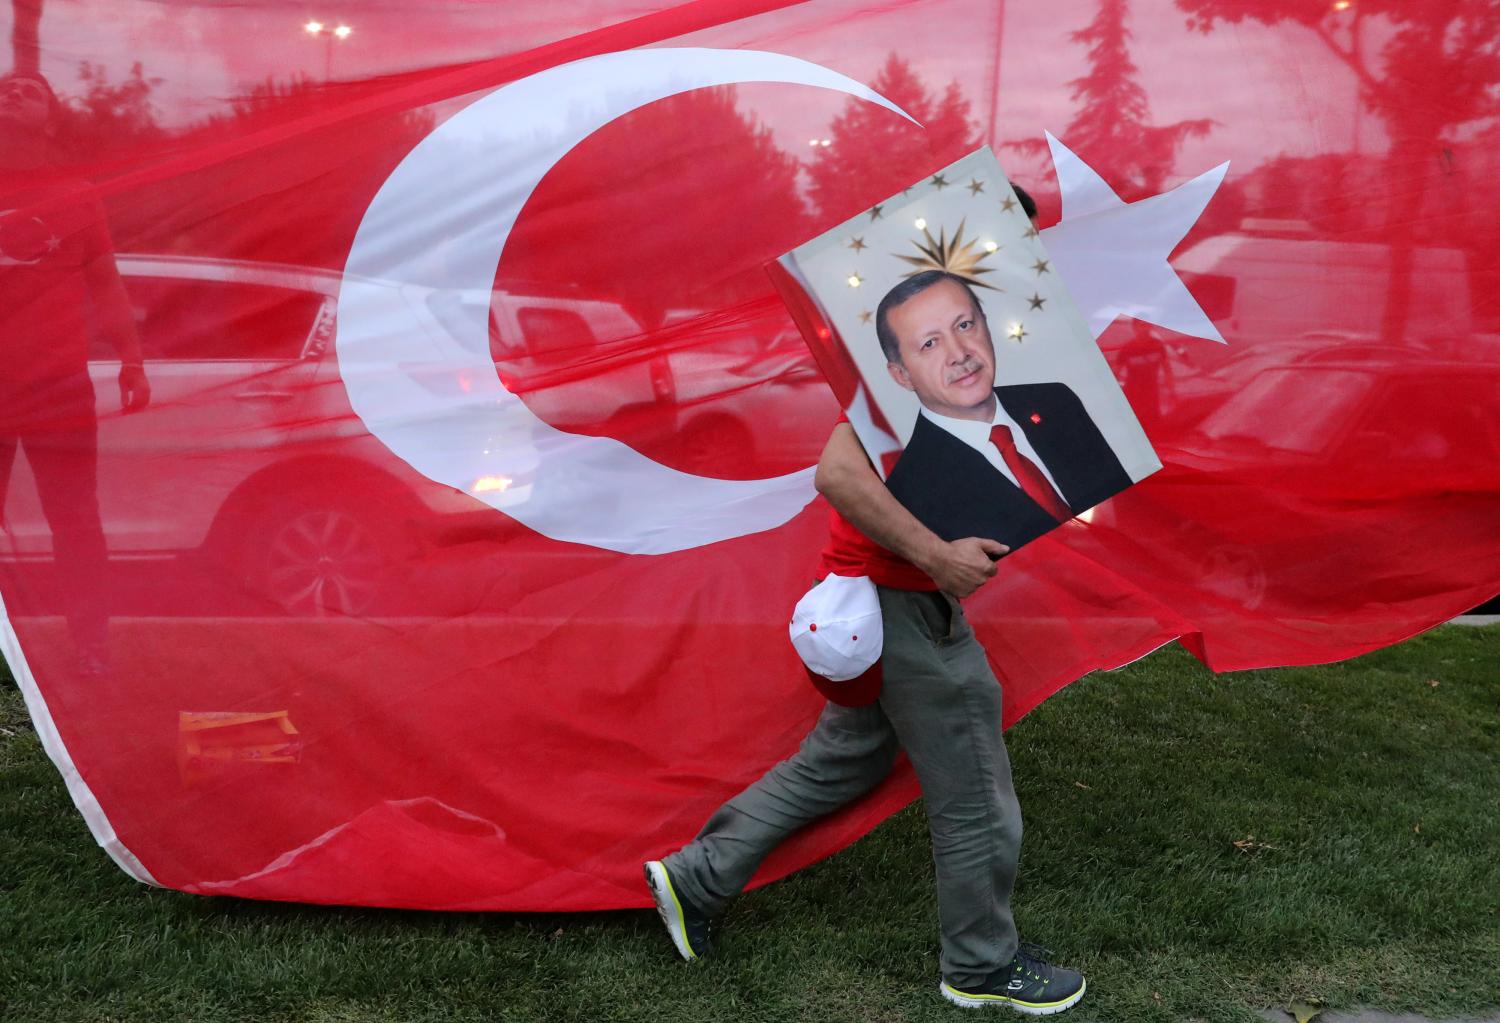 A supporters of Turkish President Tayyip Erdogan holds his picture in front of a Turkish flag, in front of Turkey's ruling AK Party (AKP) headquarters in Istanbul,Turkey, June 24, 2018. REUTERS/Goran Tomasevic      TPX IMAGES OF THE DAY - RC1D72DCC500